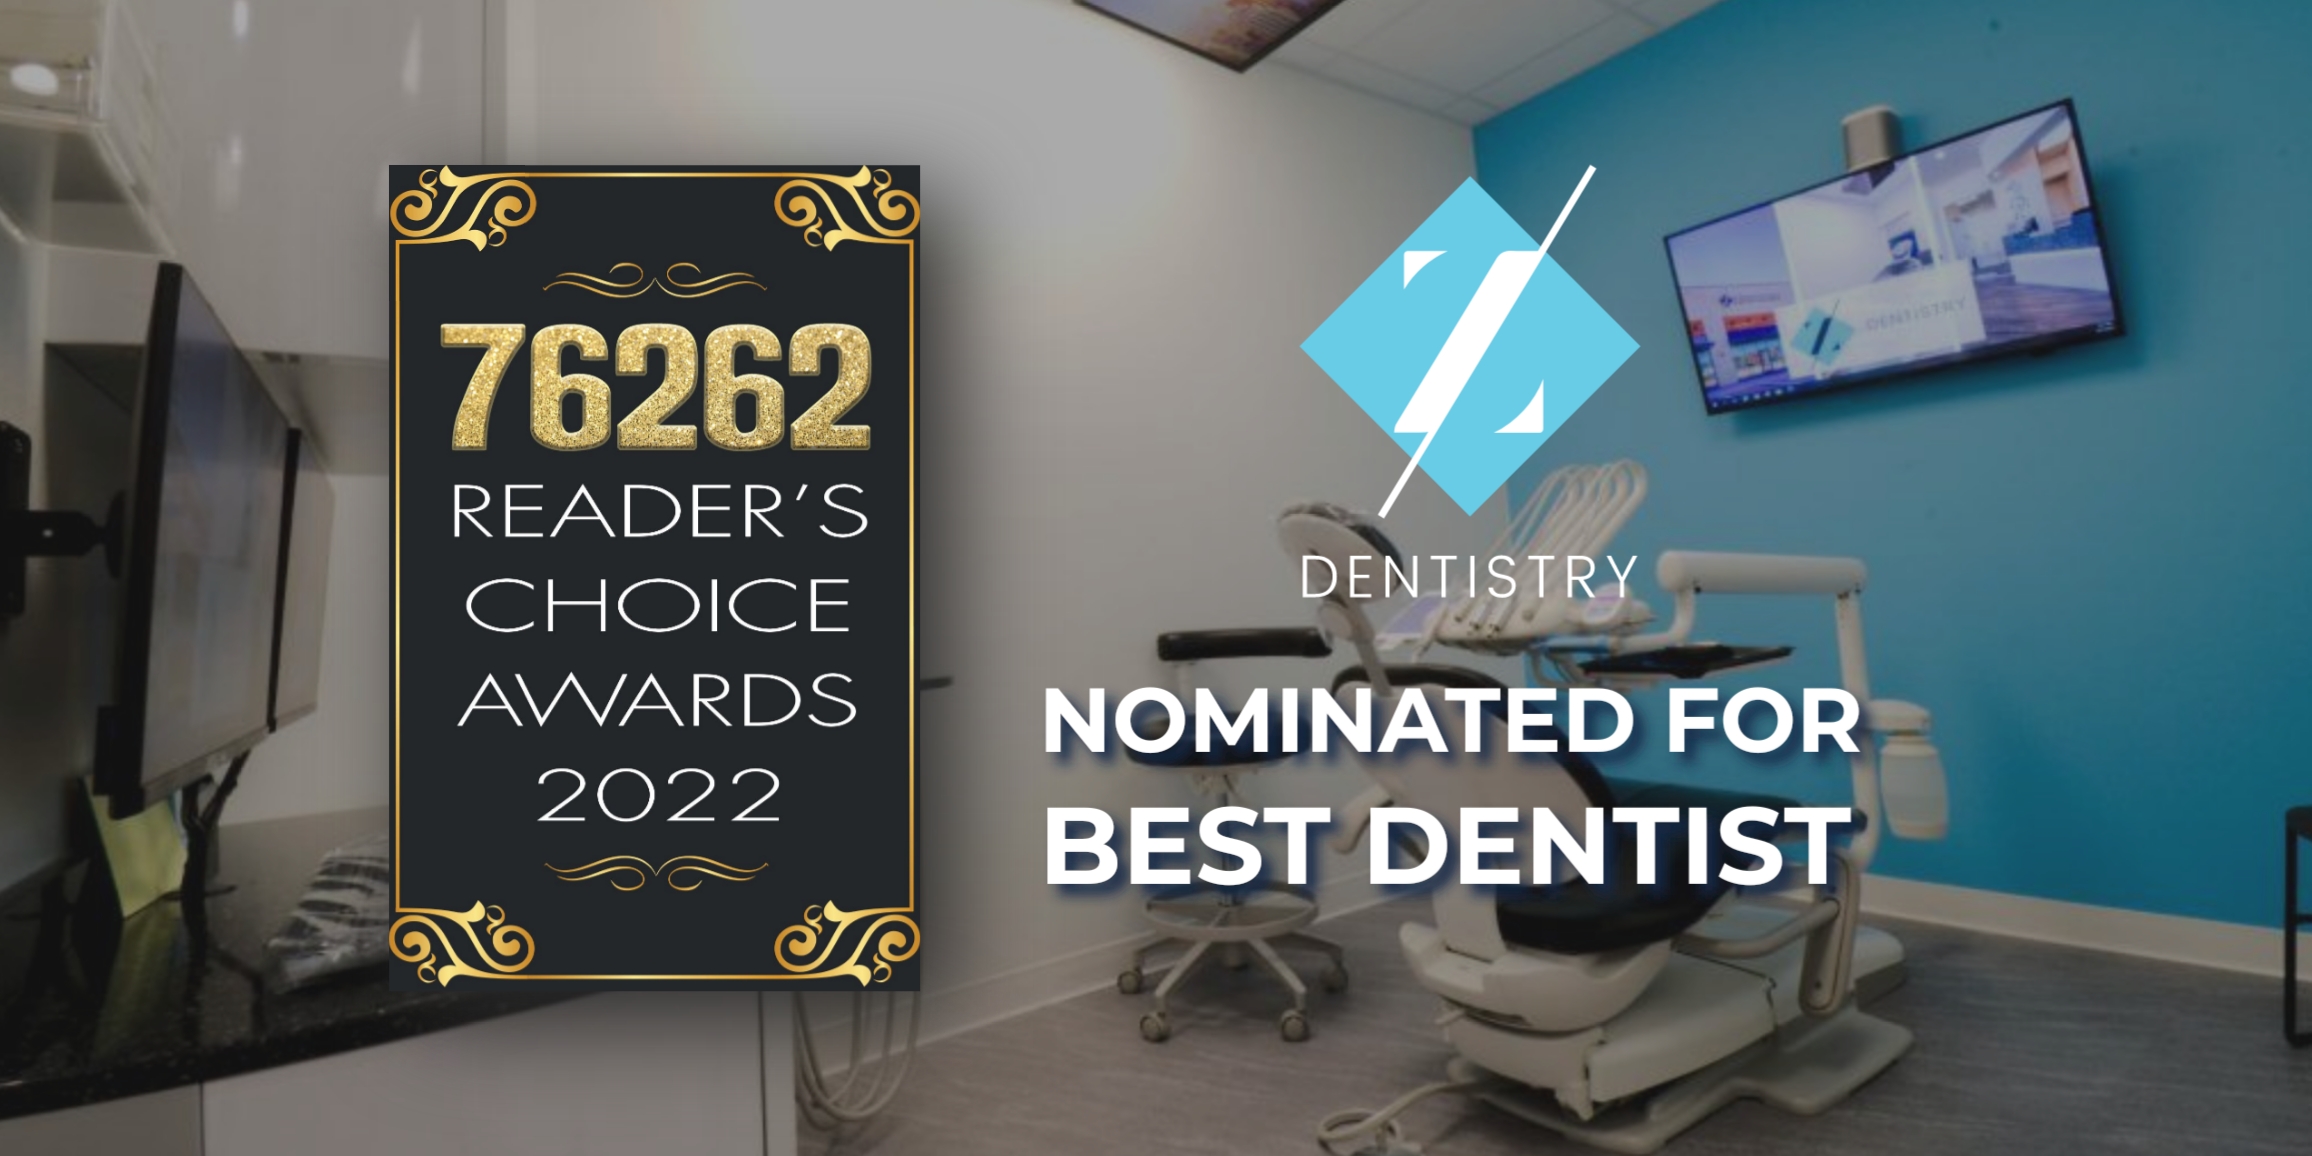 Z Dentistry Nominated Best Dentist for Local Reader's Choice Awards